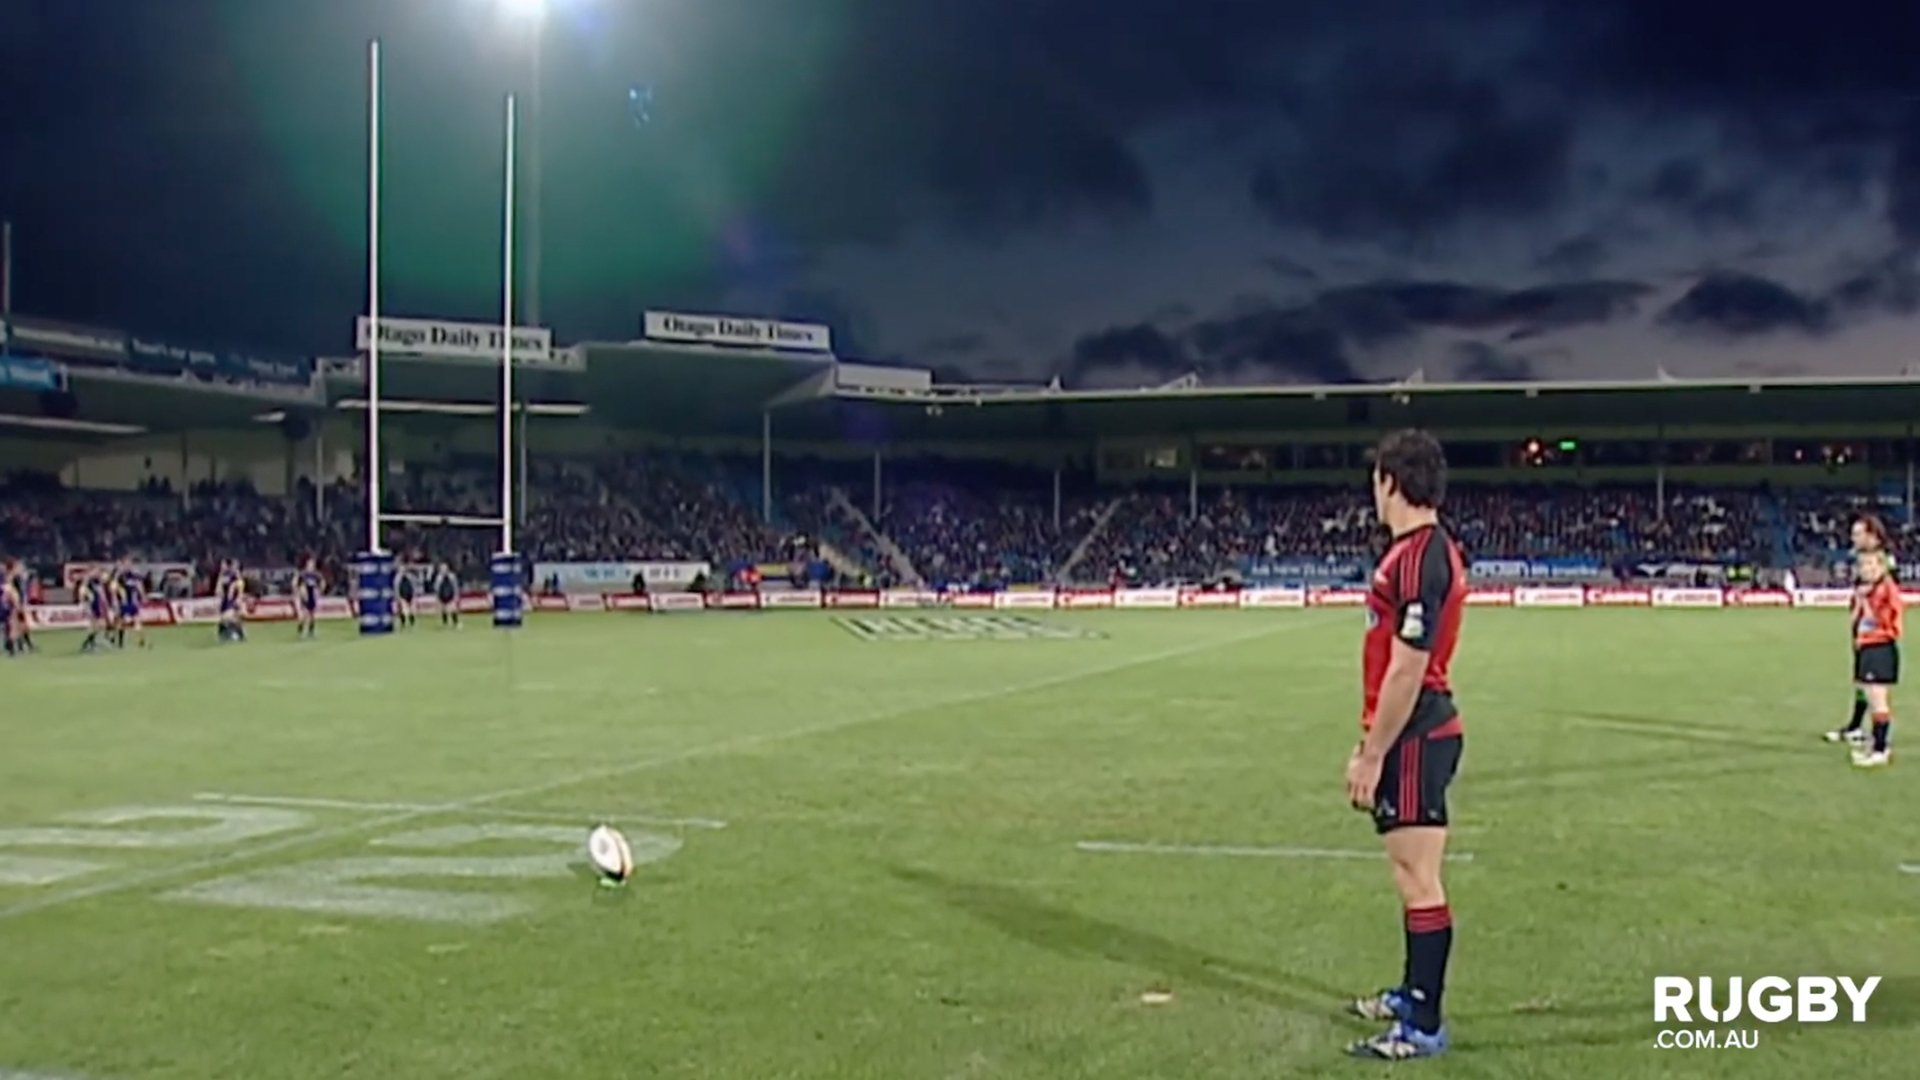 The impossible Dan Carter kick that made people realise he was one of a kind